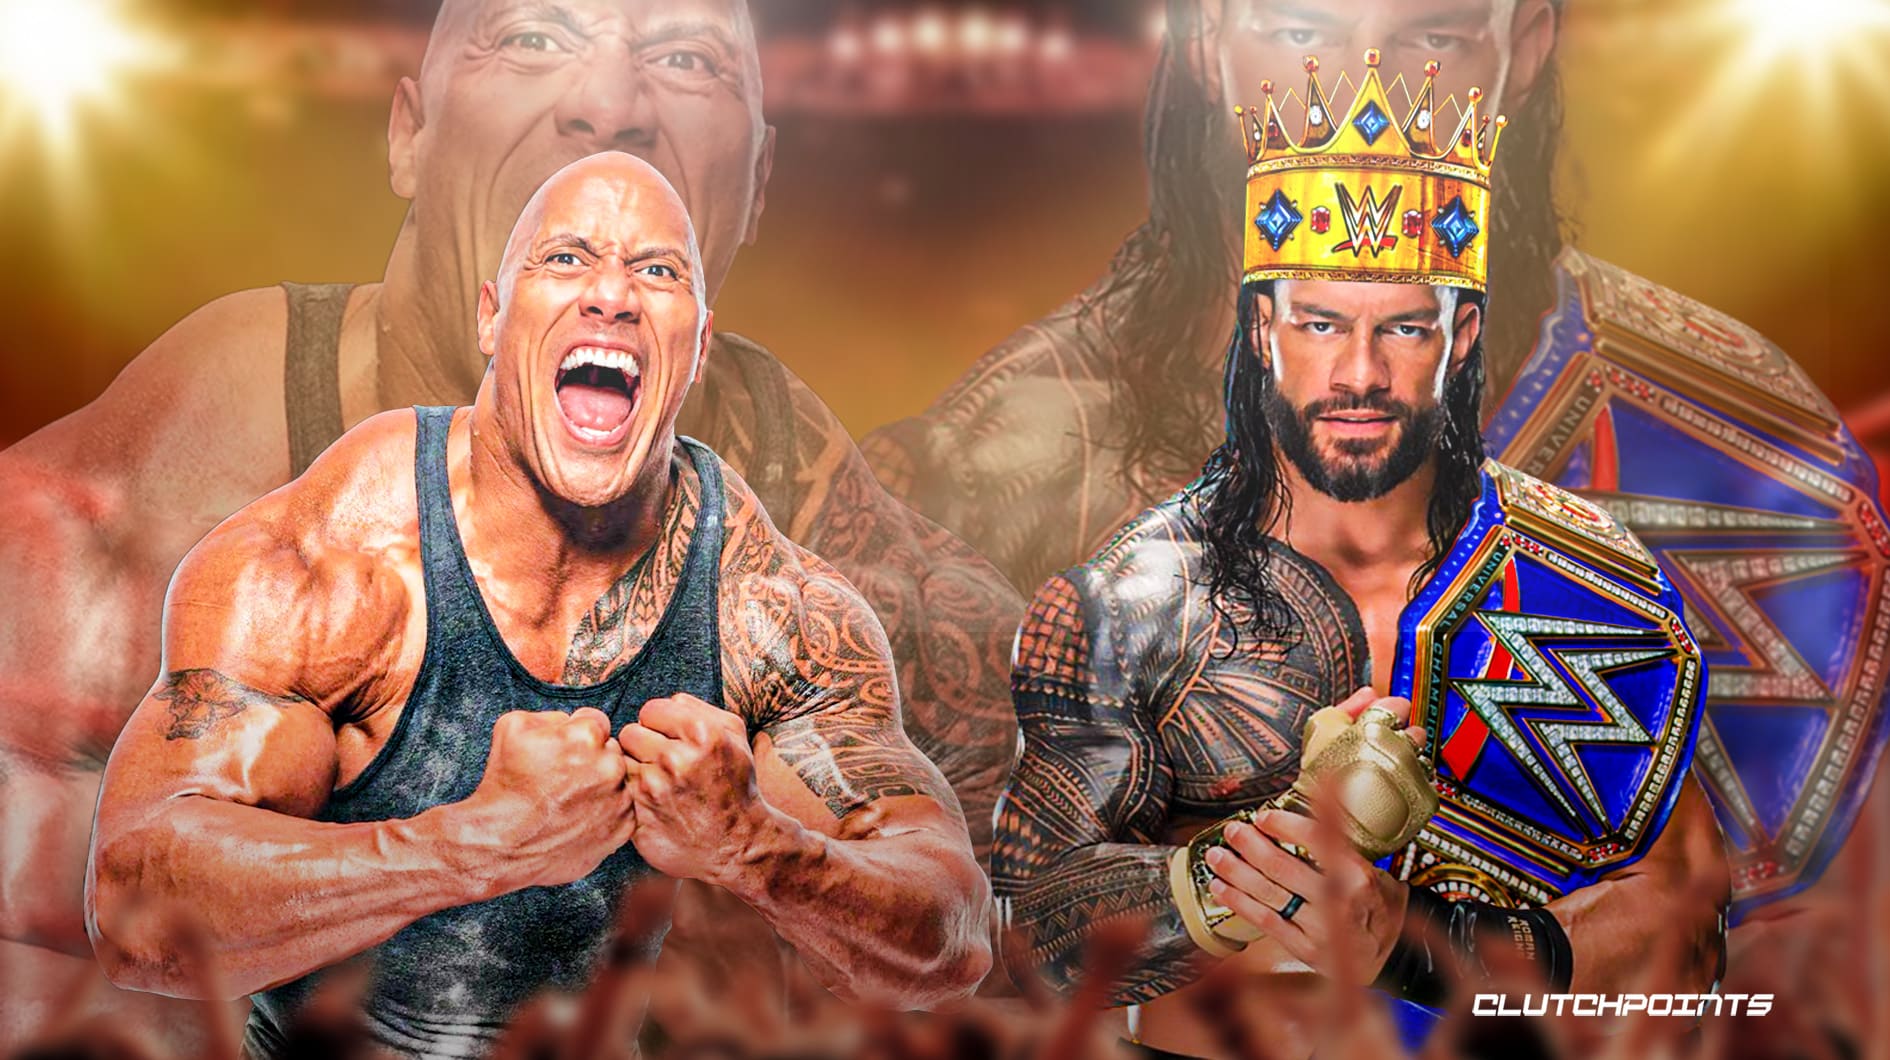 roman reigns and the rock related